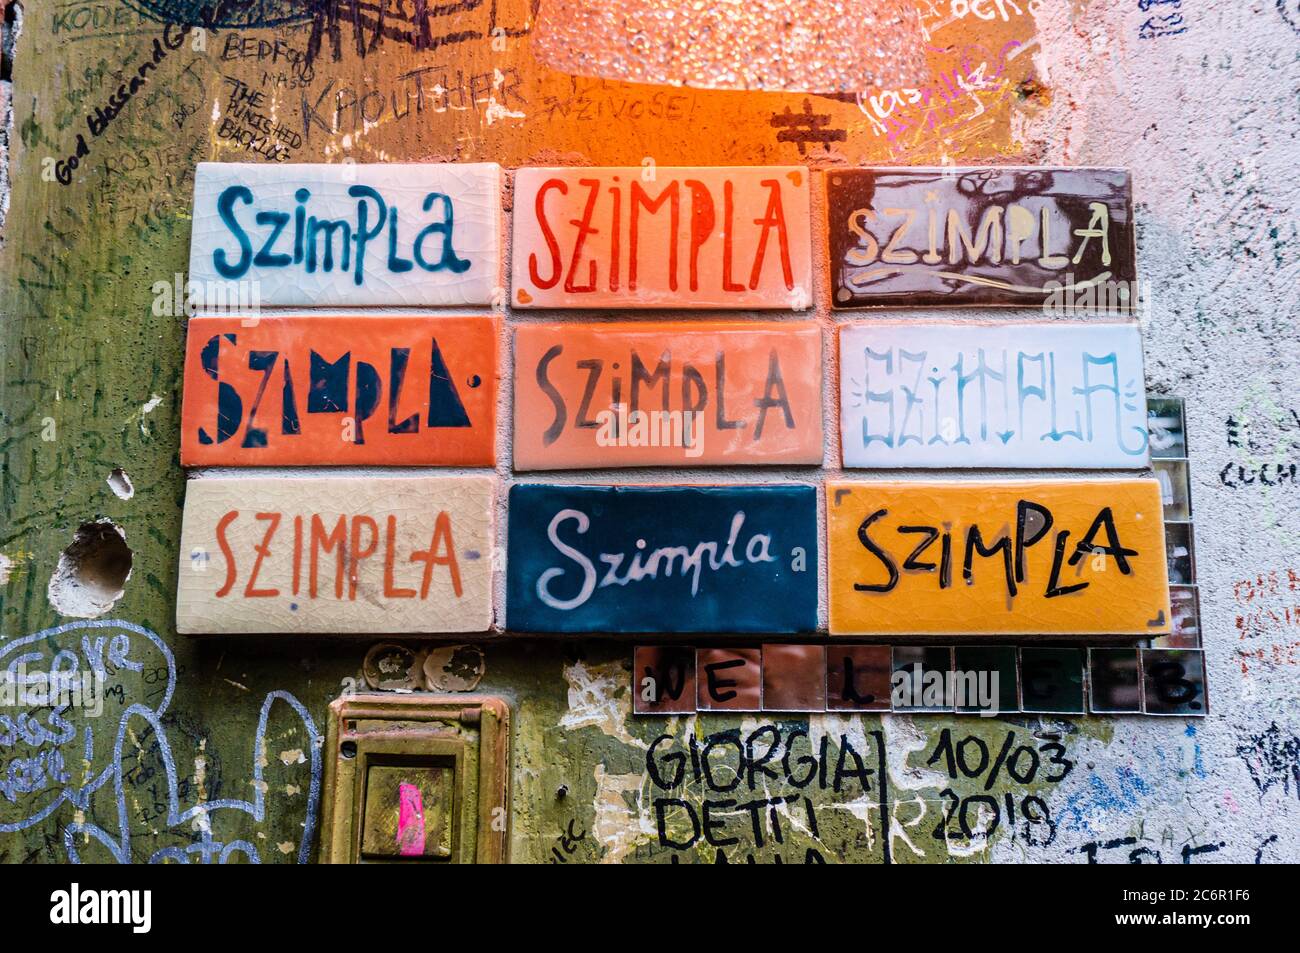 Hungary, Budapest - August 8th 2018. Signs with word Szimpla written on colorful tiles. Ruin bar pub romkocsma. Originality varied lettering graffiti Stock Photo